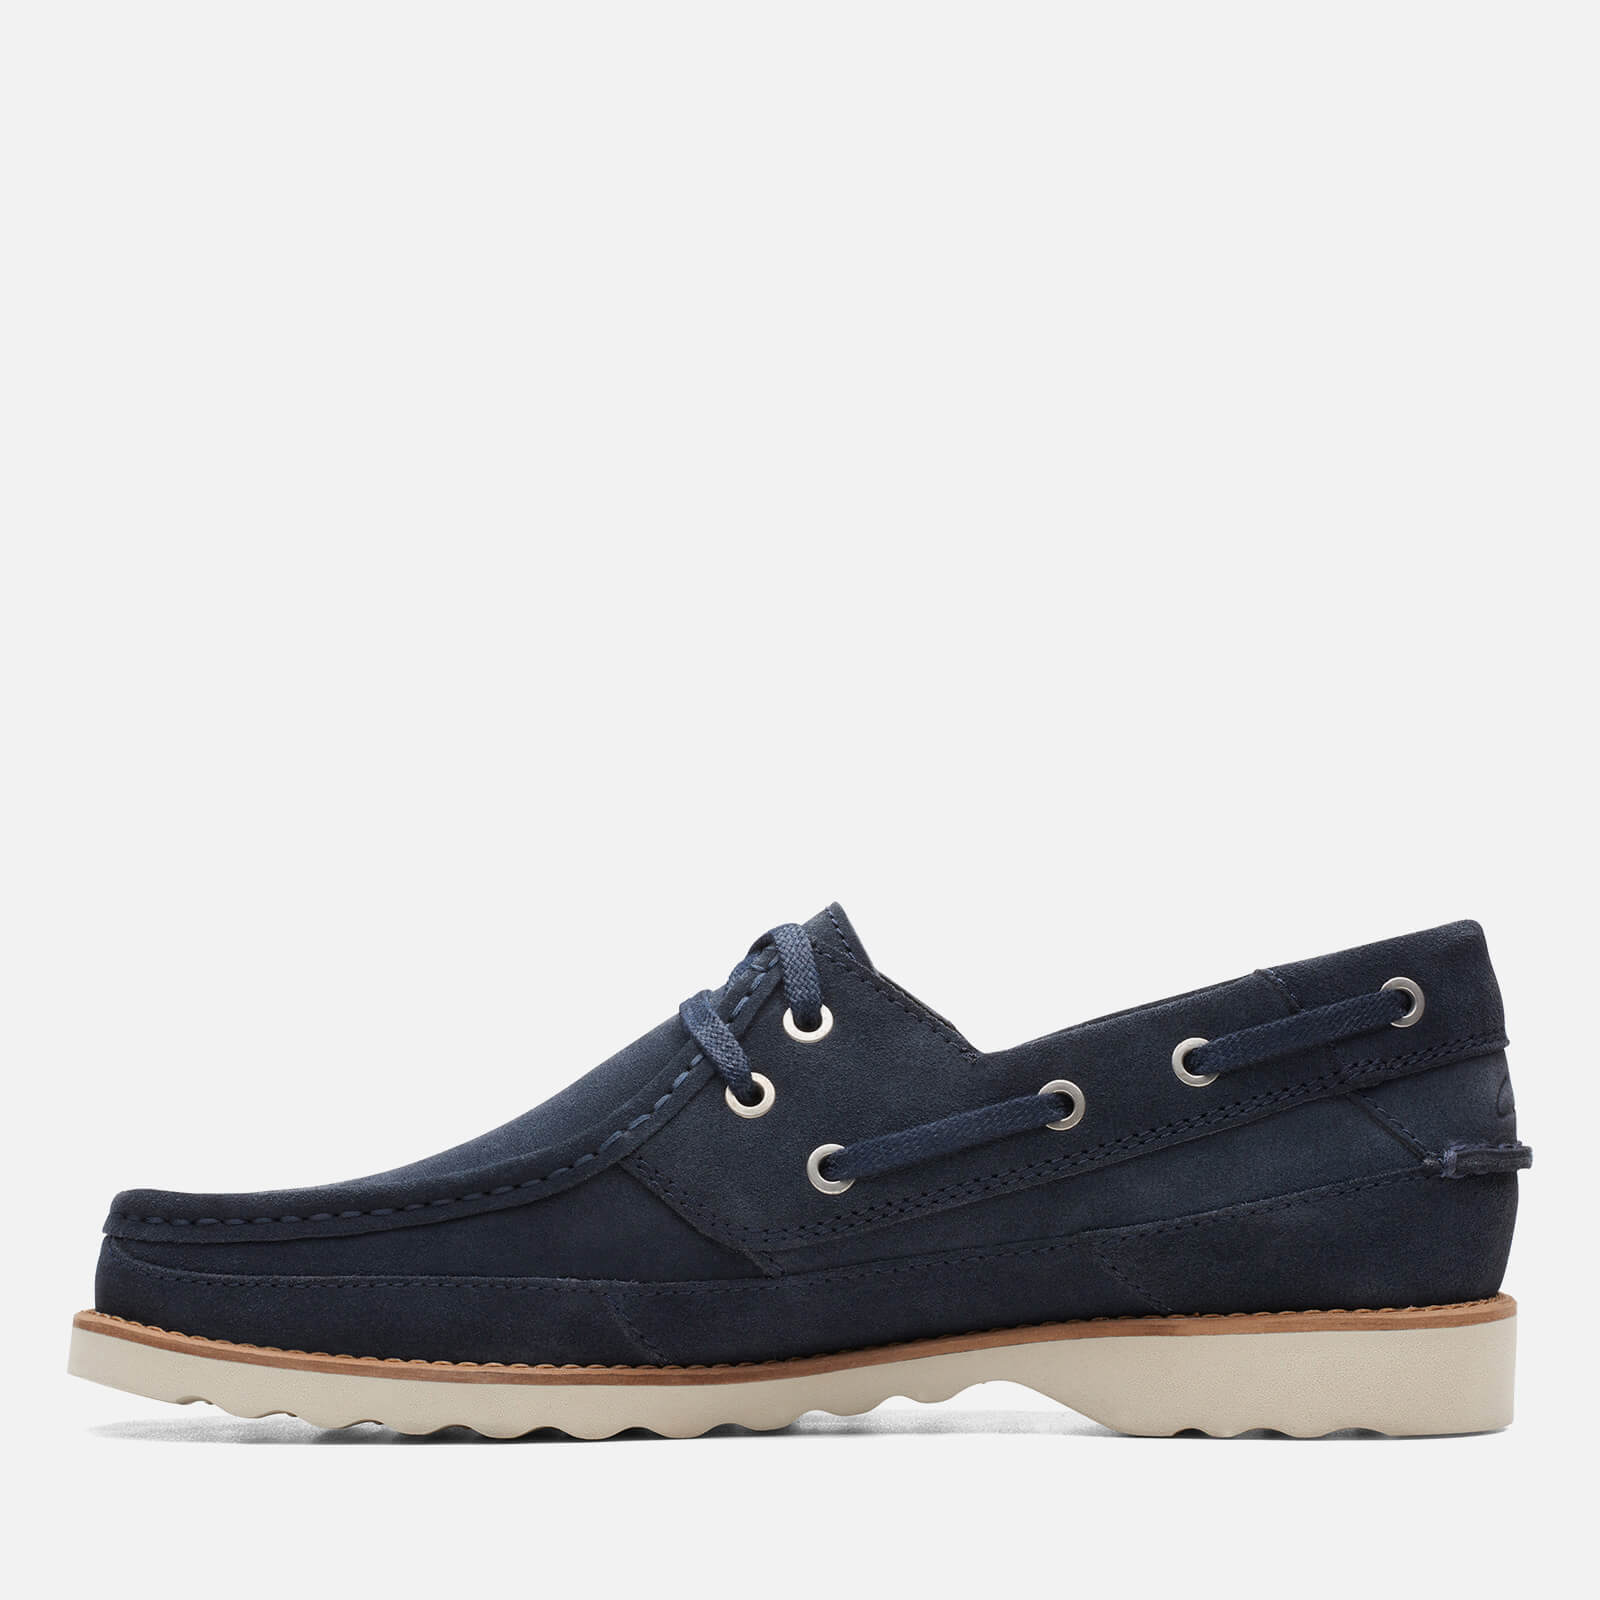 clarks men's durleigh sail suede boat shoes - navy - uk 10